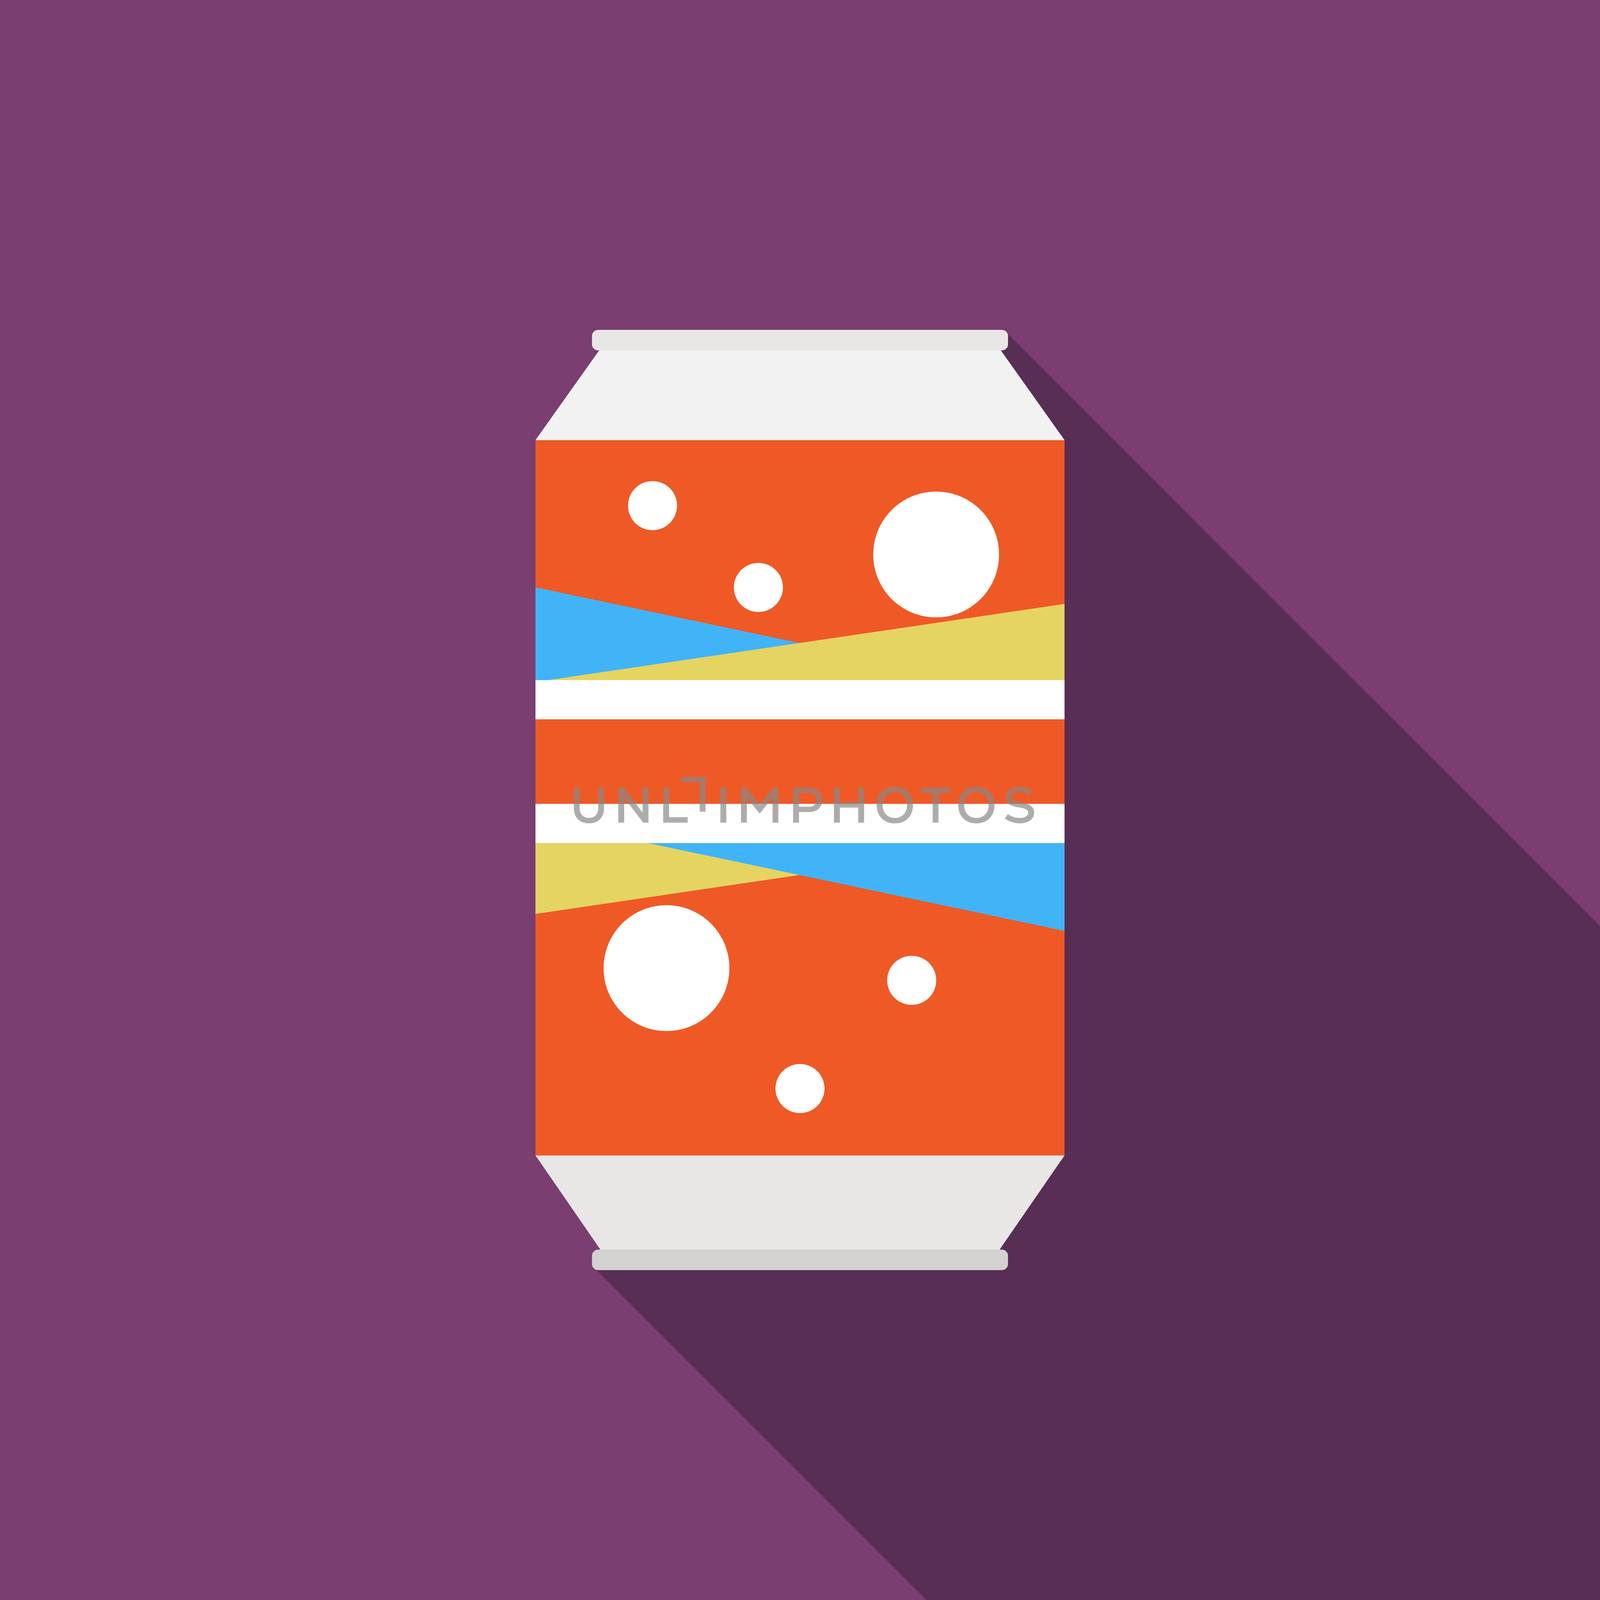 Flat design modern vector illustration of soda can icon with long shadow by Lemon_workshop